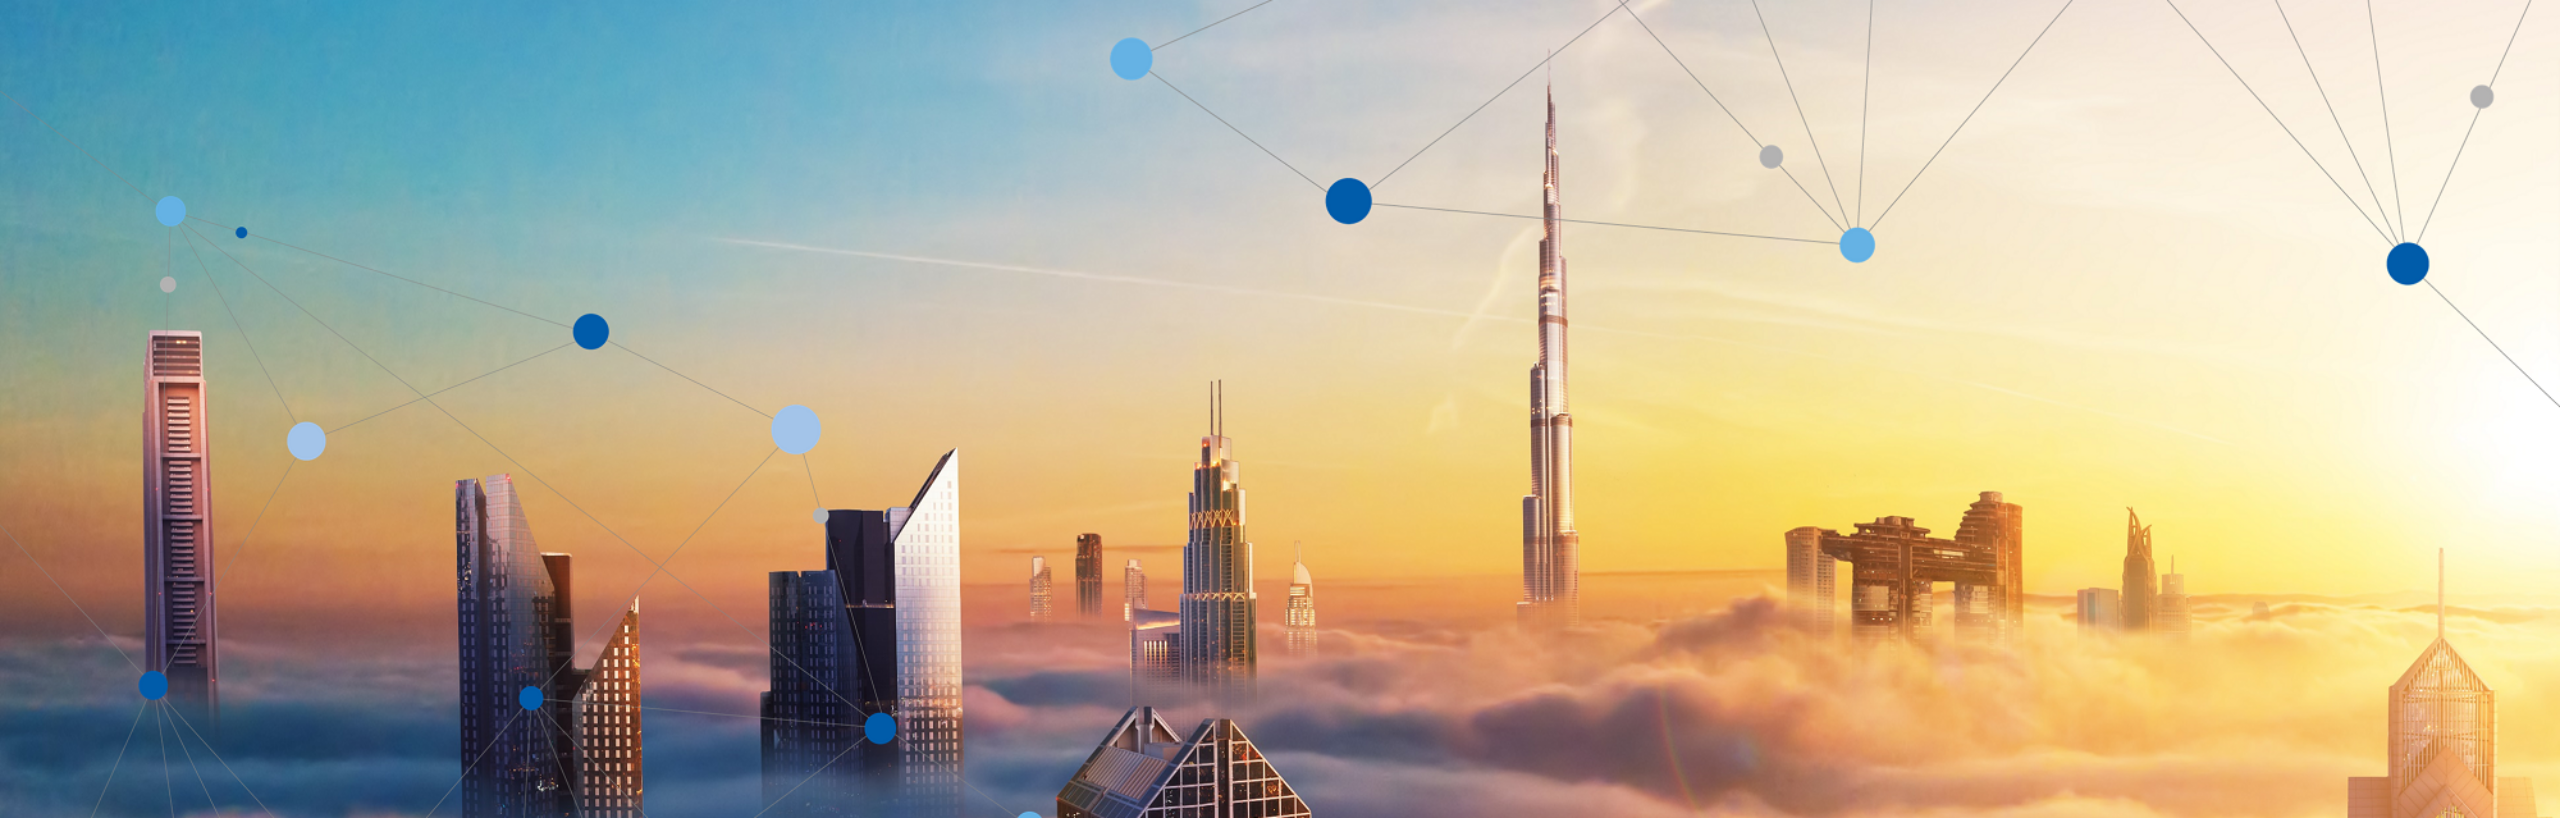 AI-native Network Slicing for 5G networks - a brightly coloured image of buildings emerging from cloud into the sun, overlaid with dots and lines